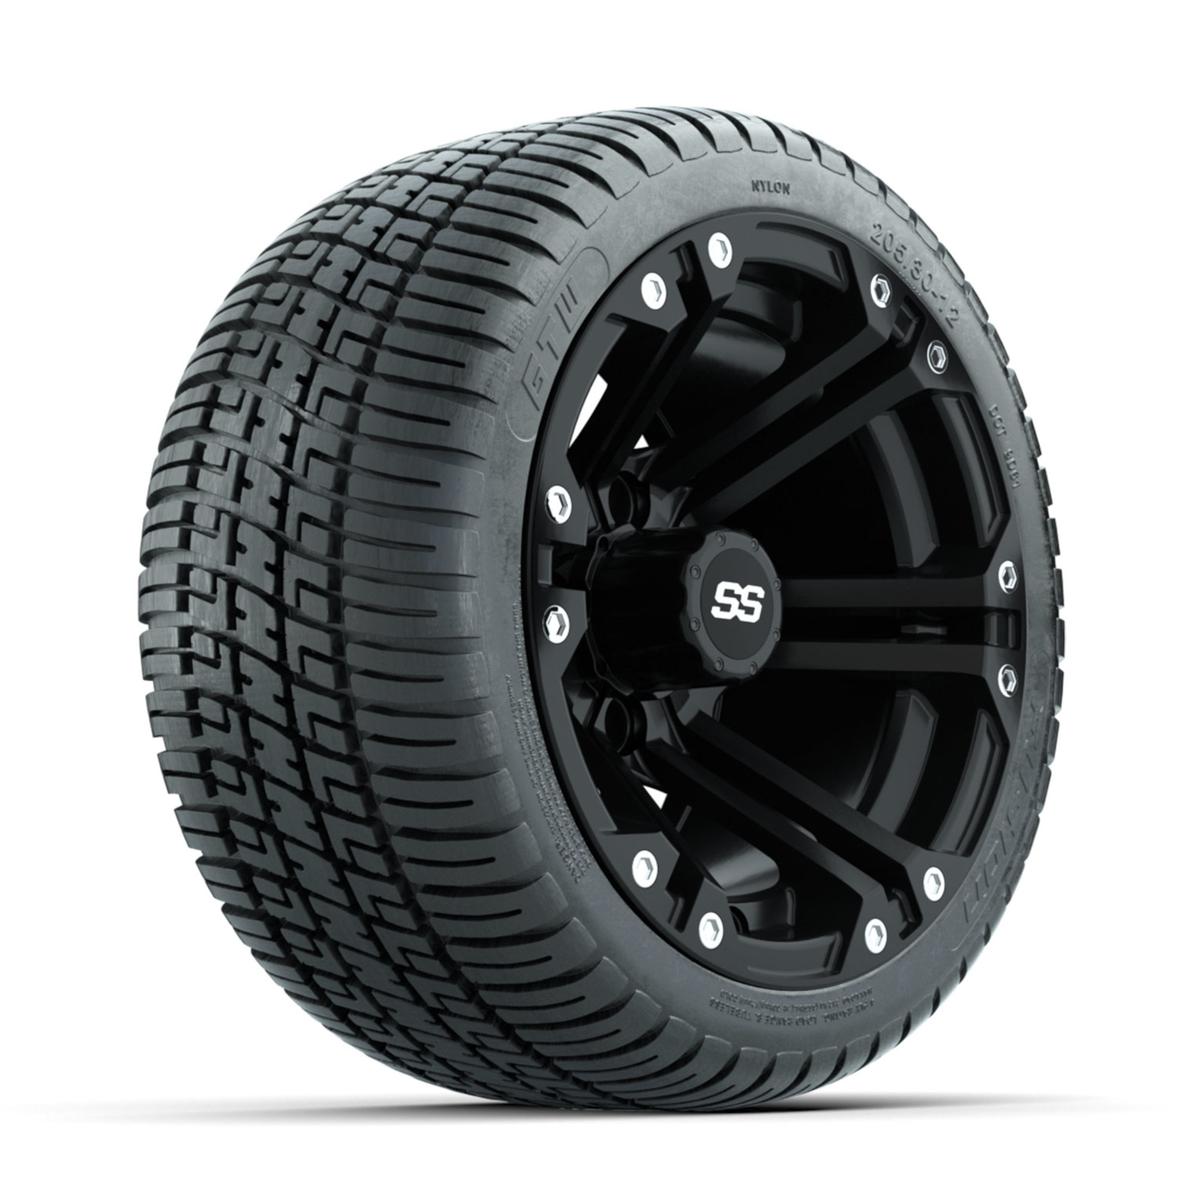 GTW Specter Matte Black 12 in Wheels with 205/30-12 Fusion Street Tires – Full Set